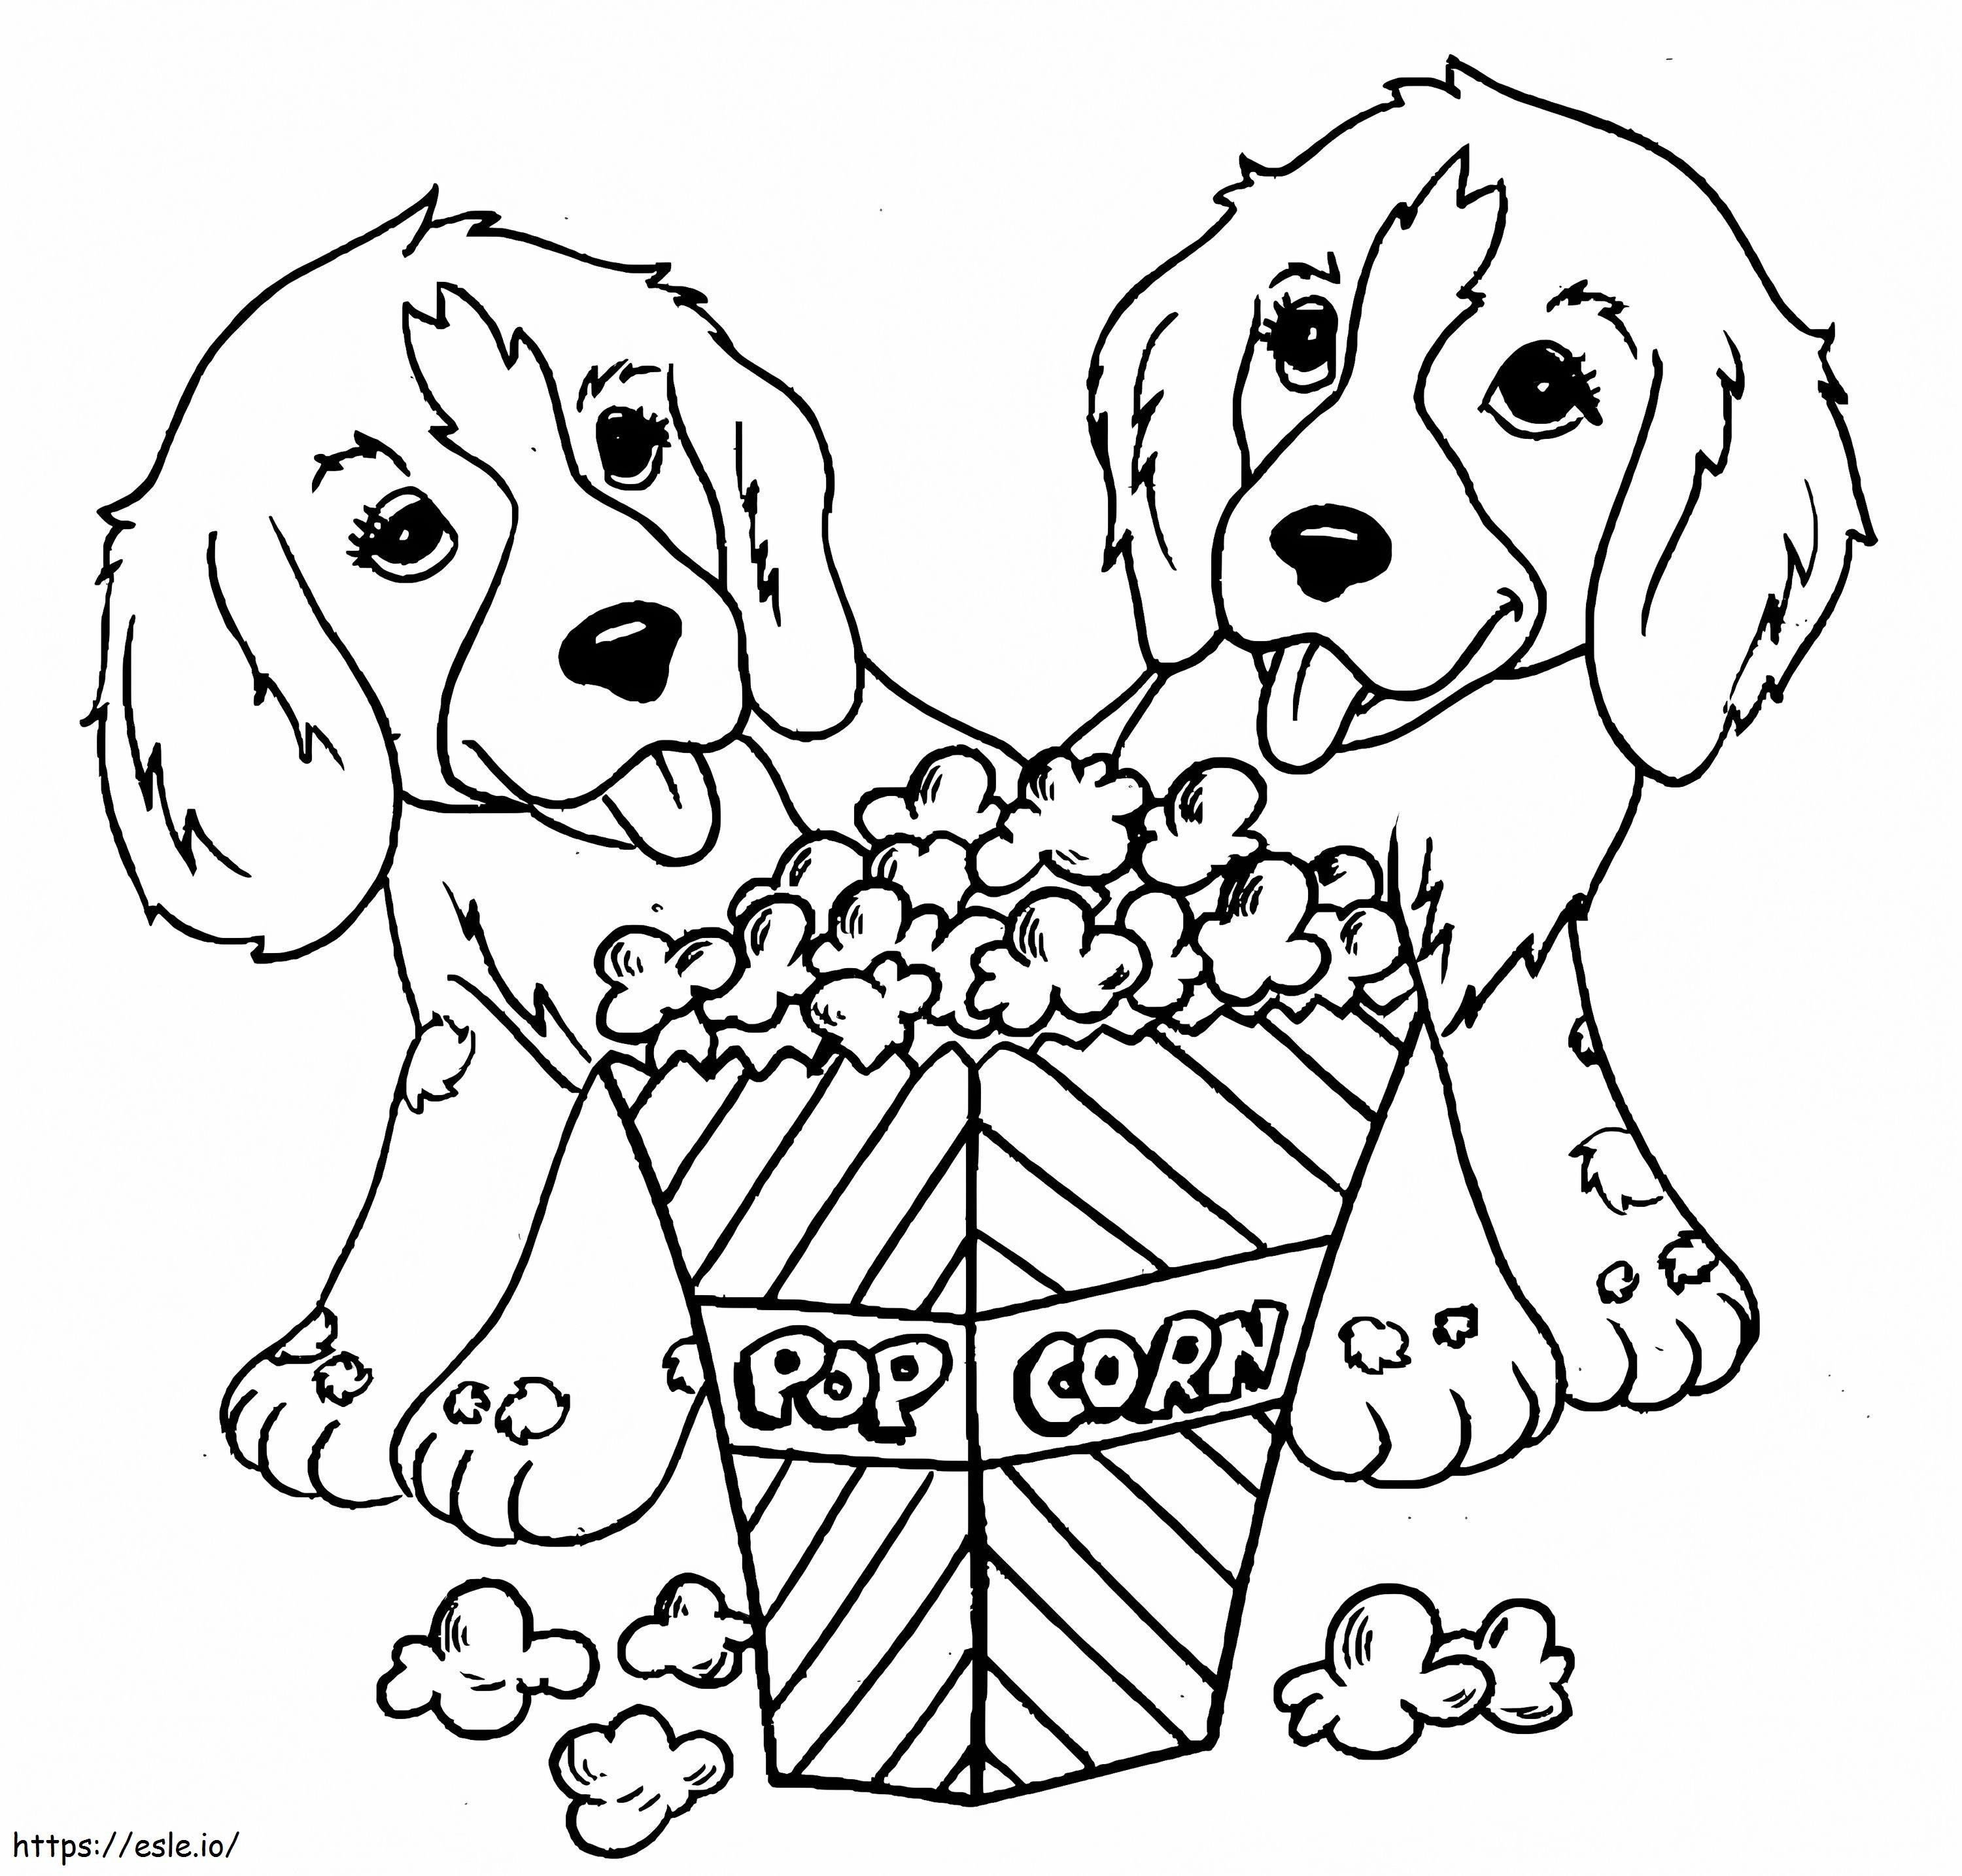 Puppies And Popcorn coloring page